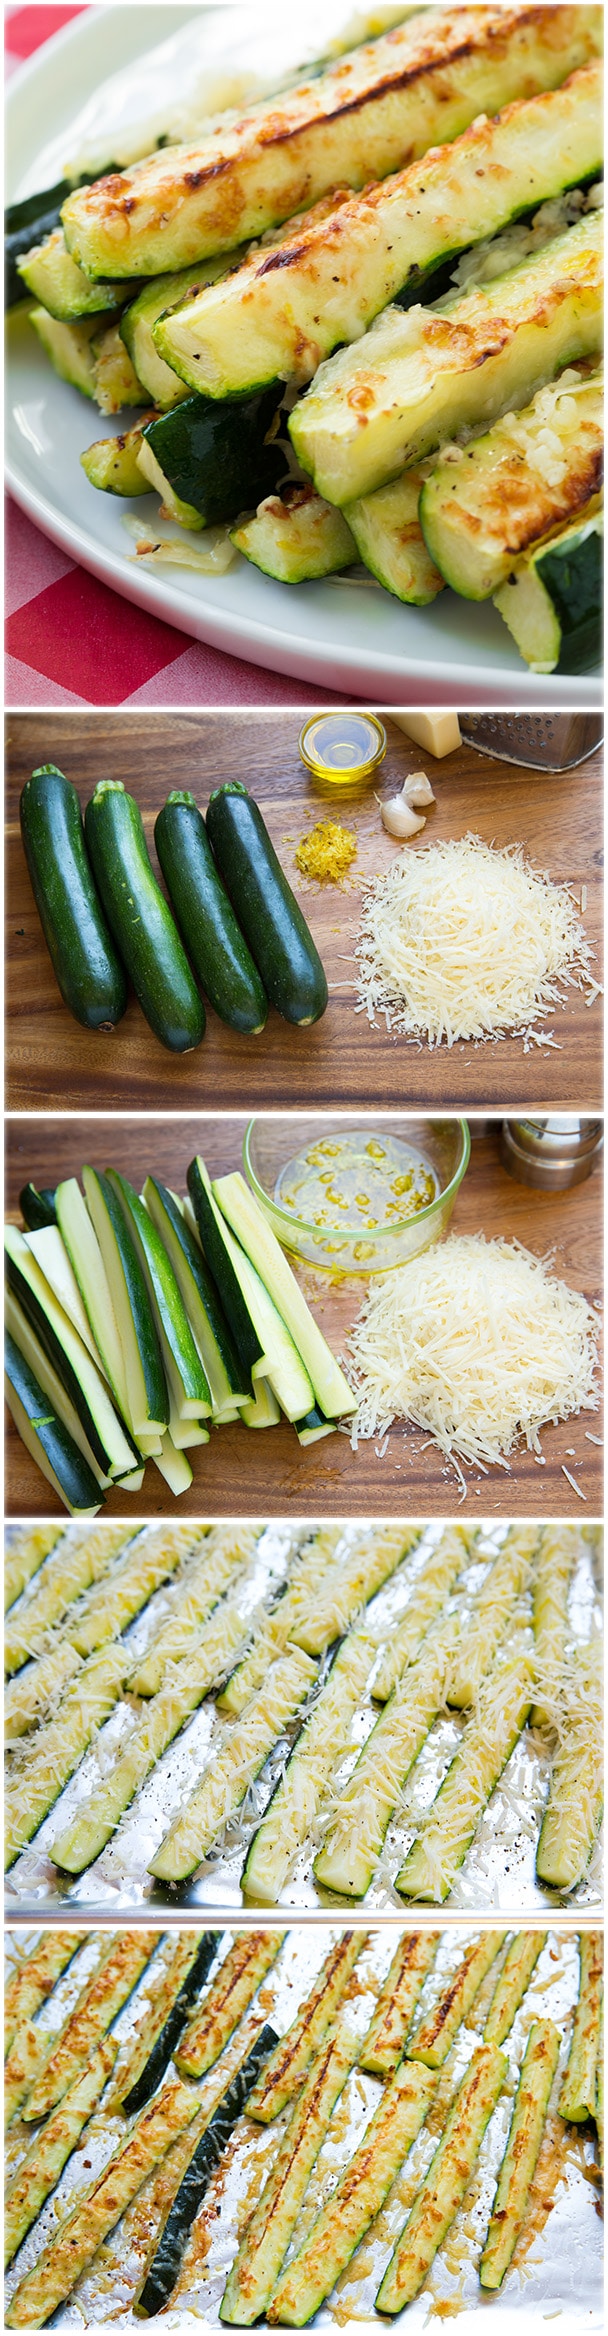 Garlic Lemon and Parmesan Oven Roasted Zucchini | Cooking Classy